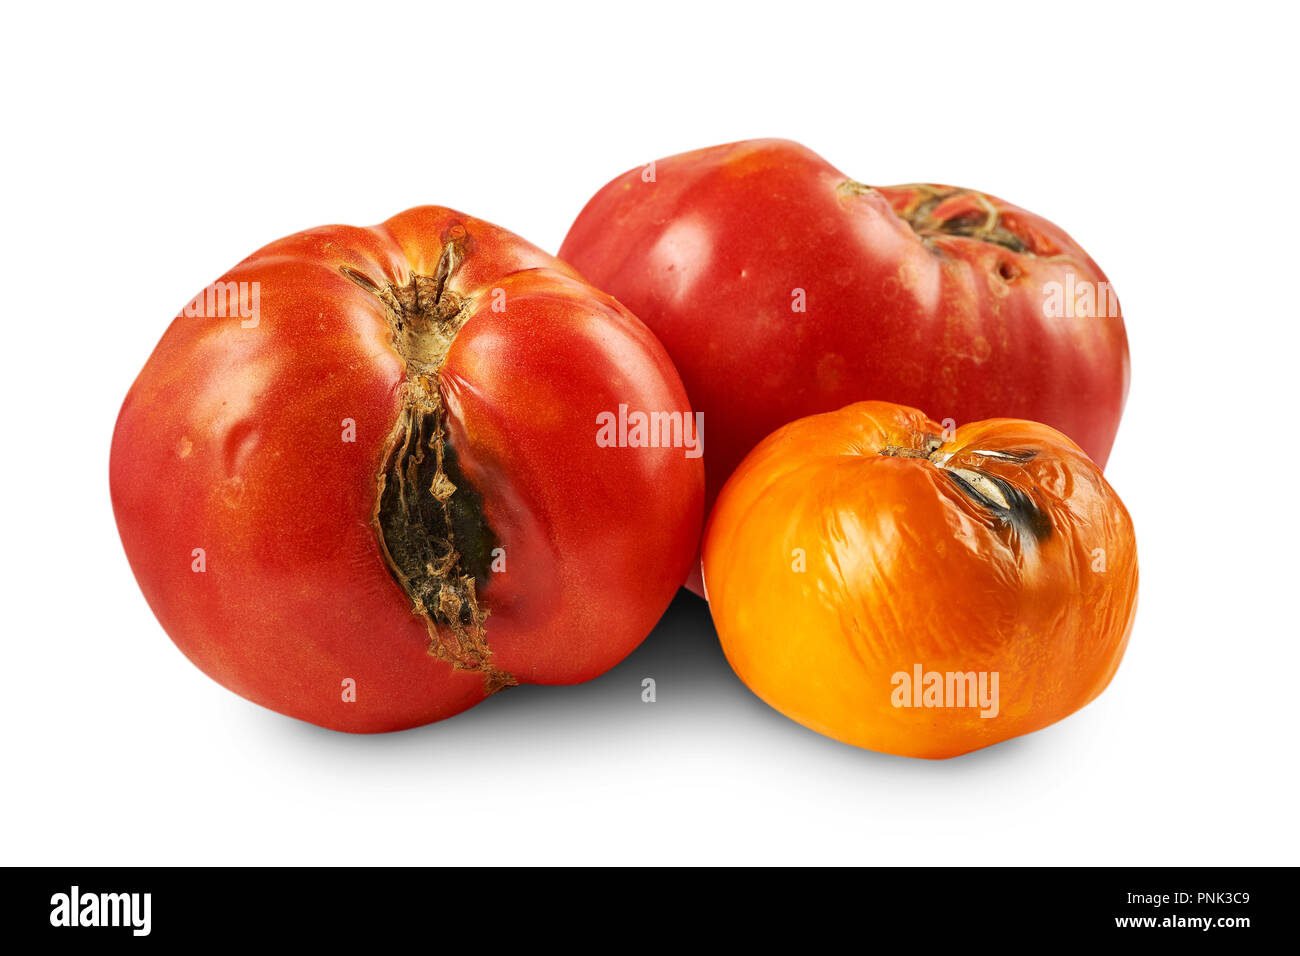 Spoiled, rotten tomatoes isolated on white background. Stock Photo